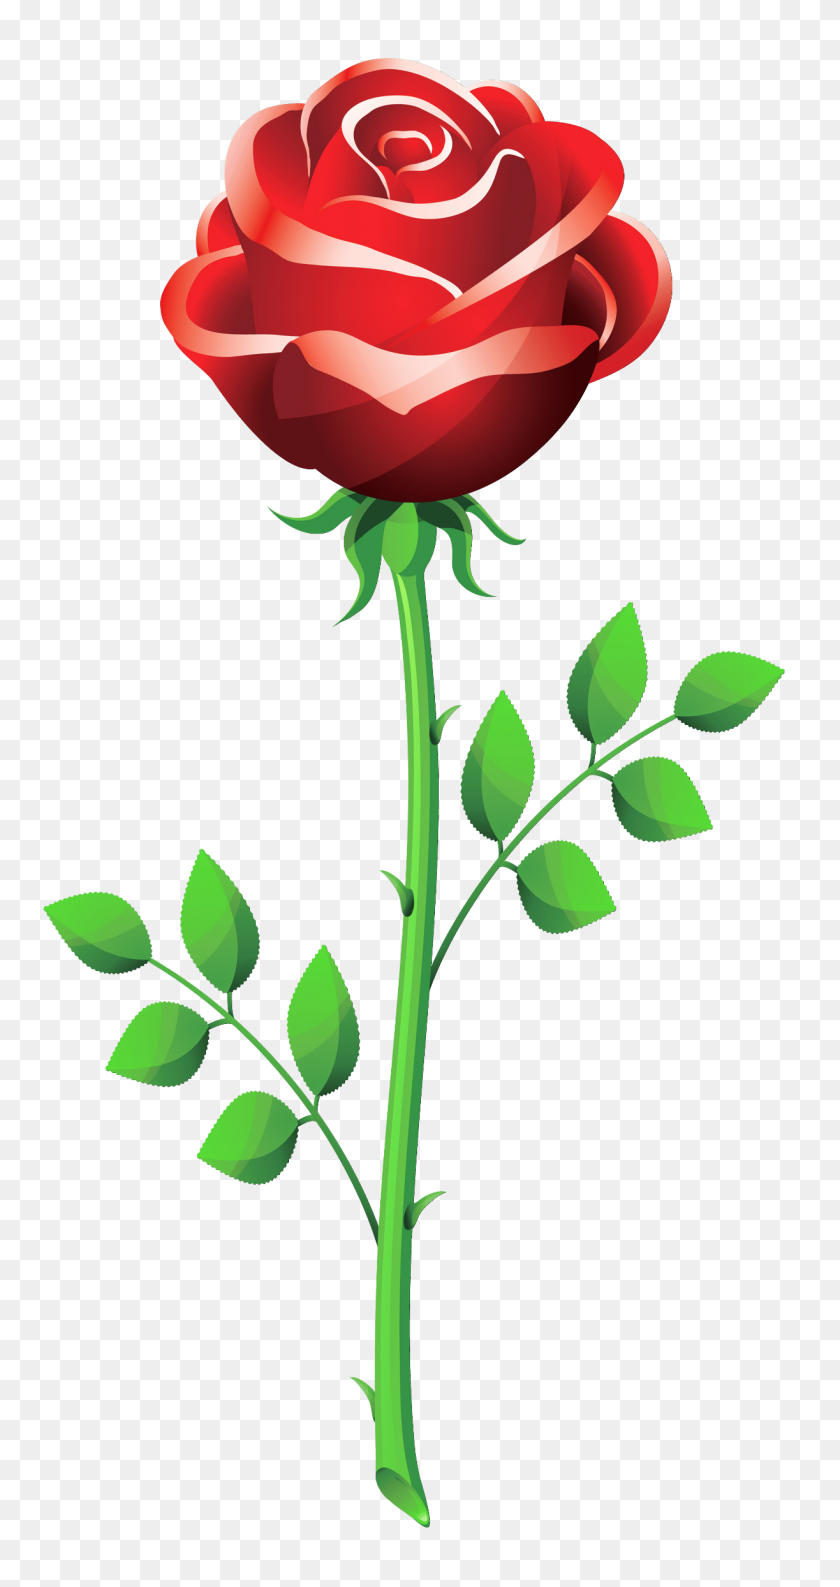 Long Stem Red Rose Beauty And The Beast Clip Art Beauty And The Beast Clipart Rose Stunning Free Transparent Png Clipart Images Free Download